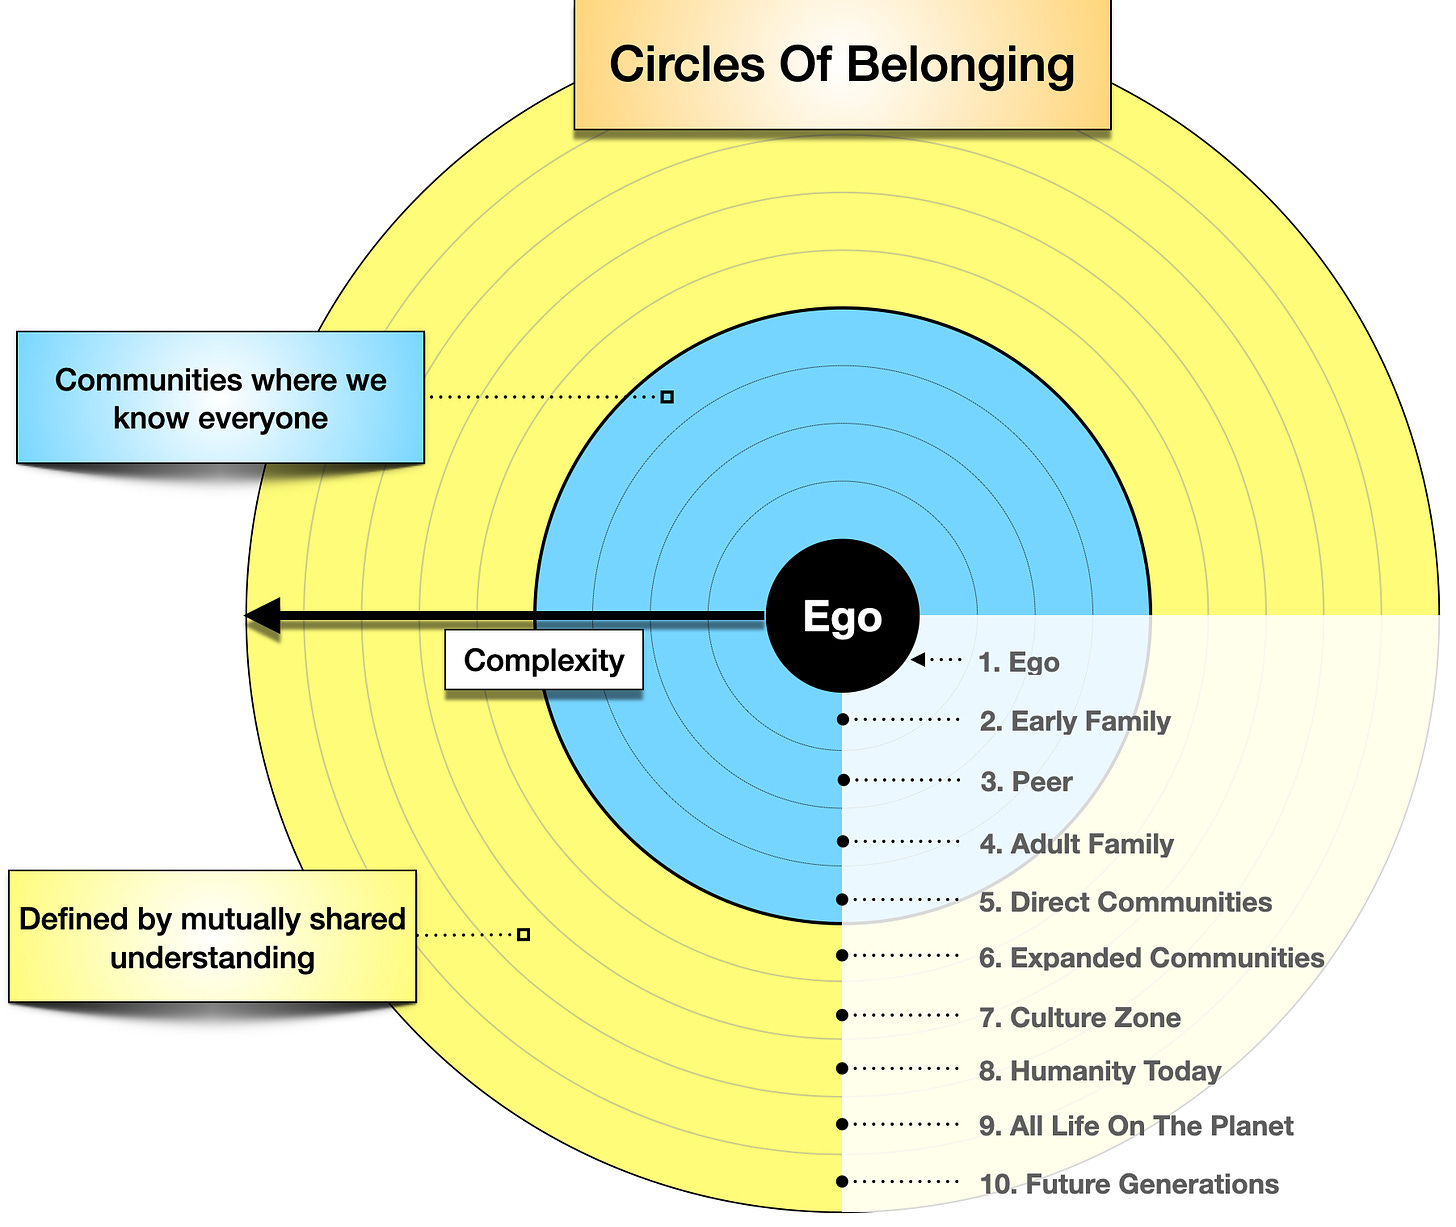 10 circles representing a widening populace starting with the self and expanding to all future generations and life on the planet